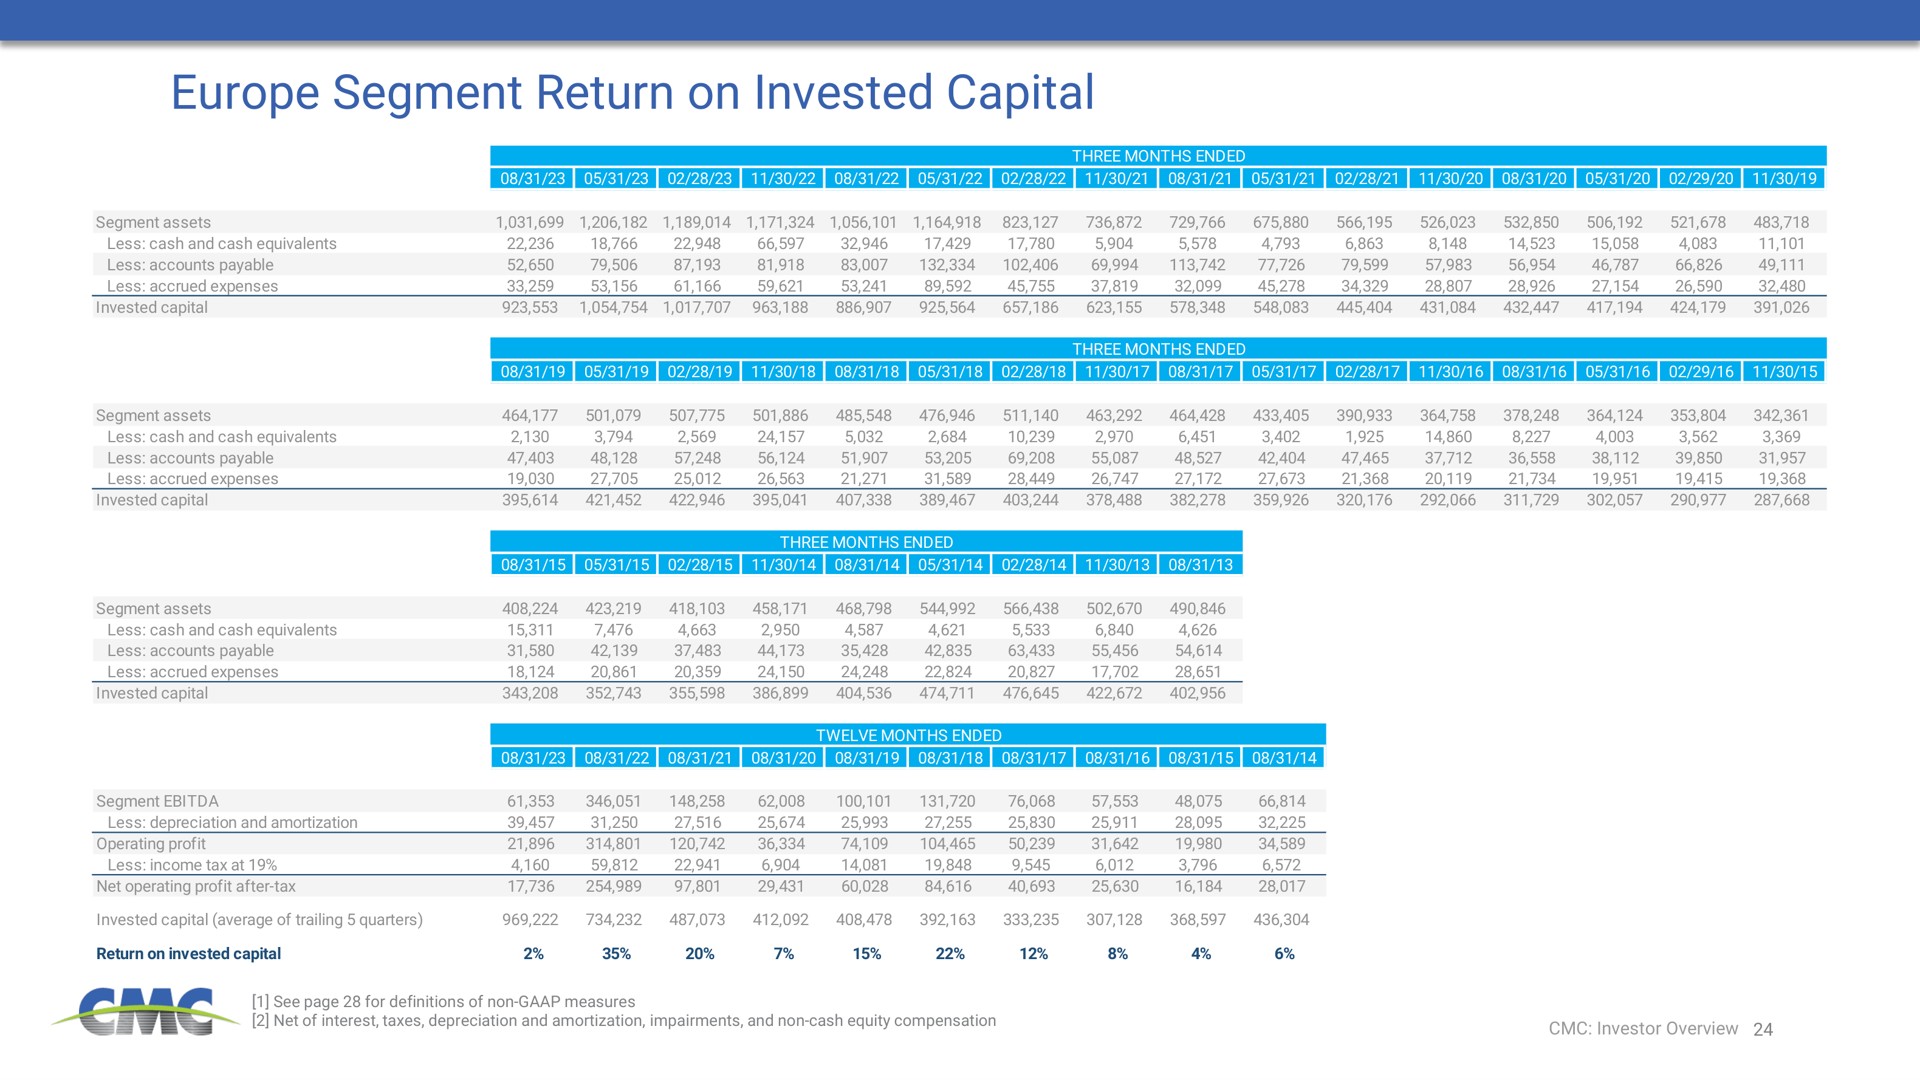 segment return on invested capital | Commercial Metals Company